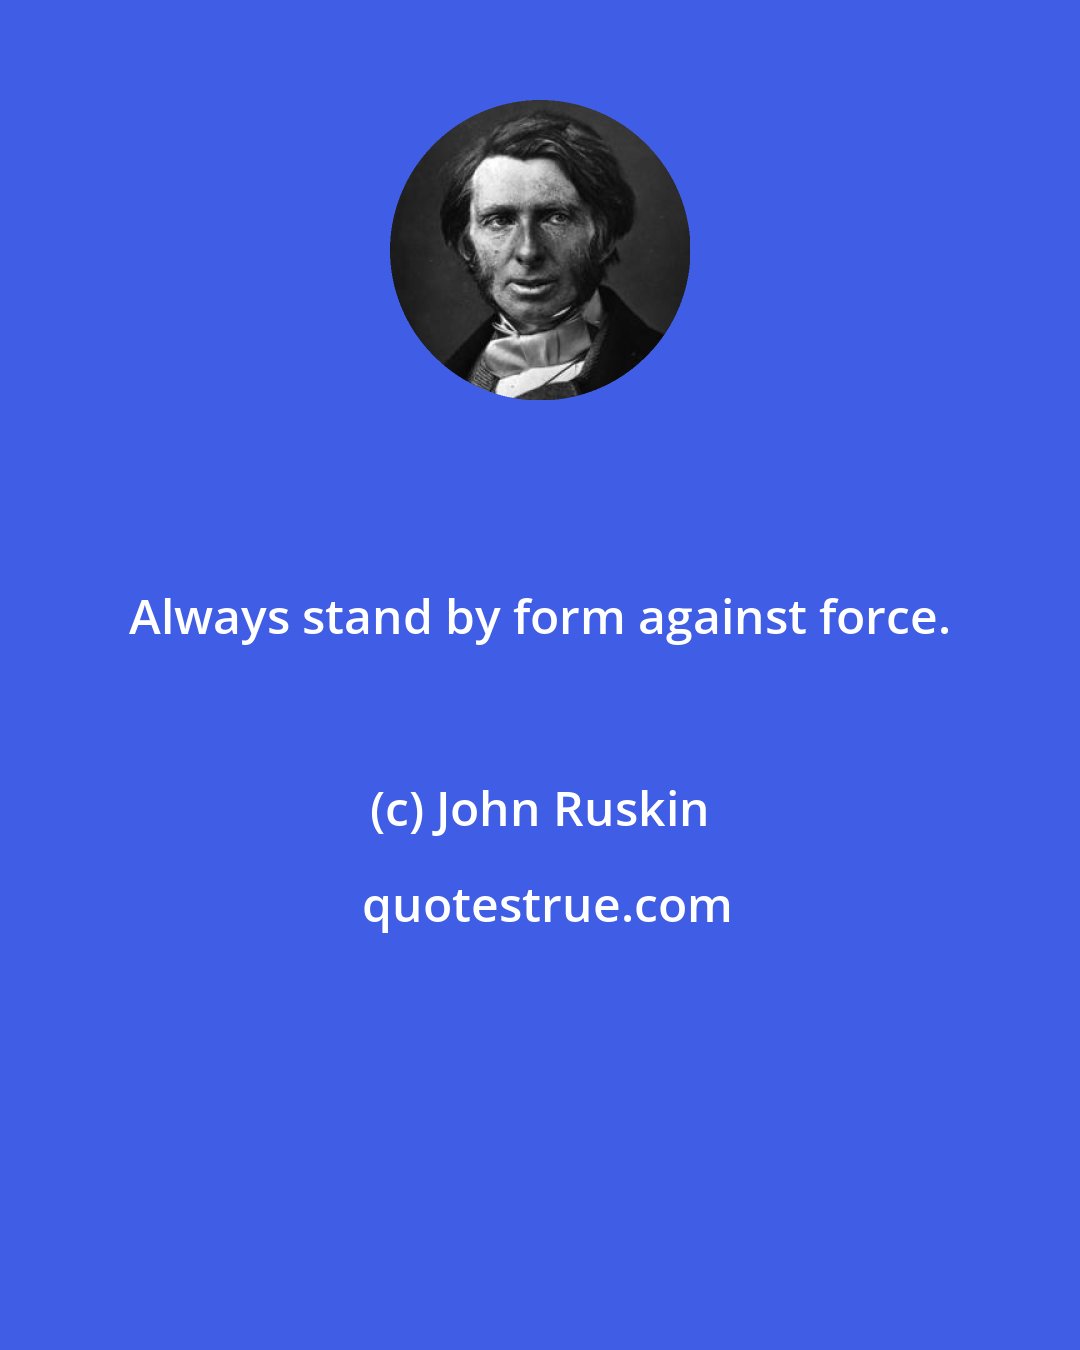 John Ruskin: Always stand by form against force.